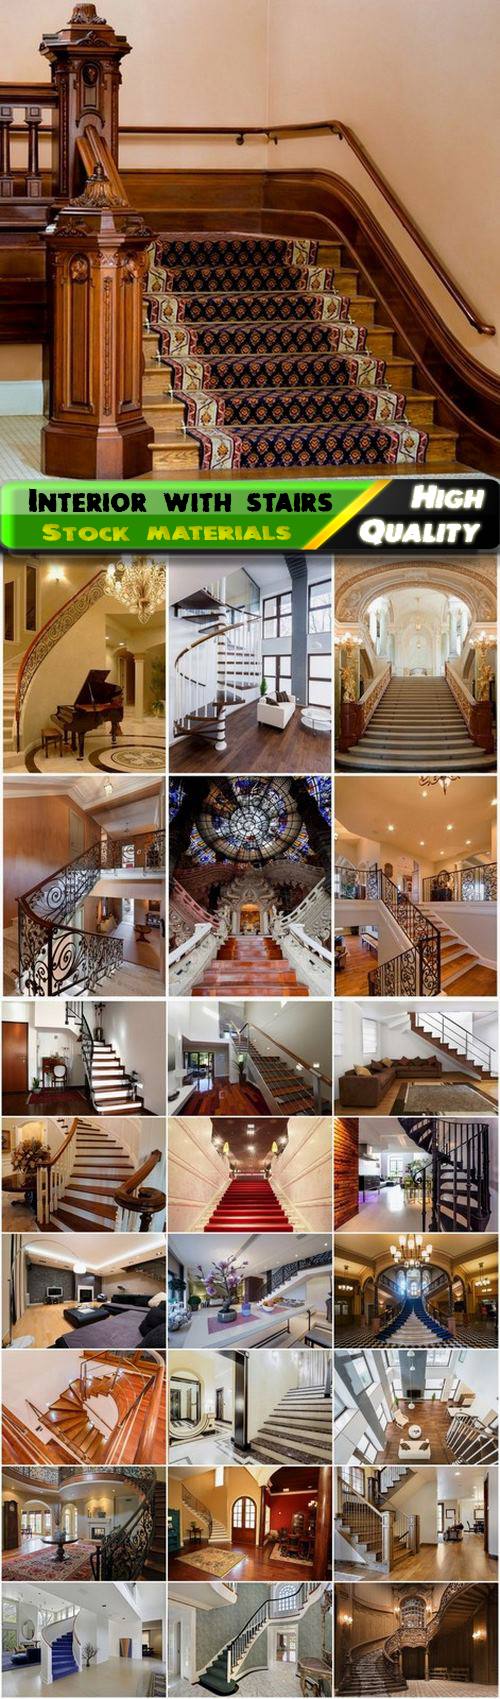 Luxury and royal home interior with stairs - 25 HQ Jpg